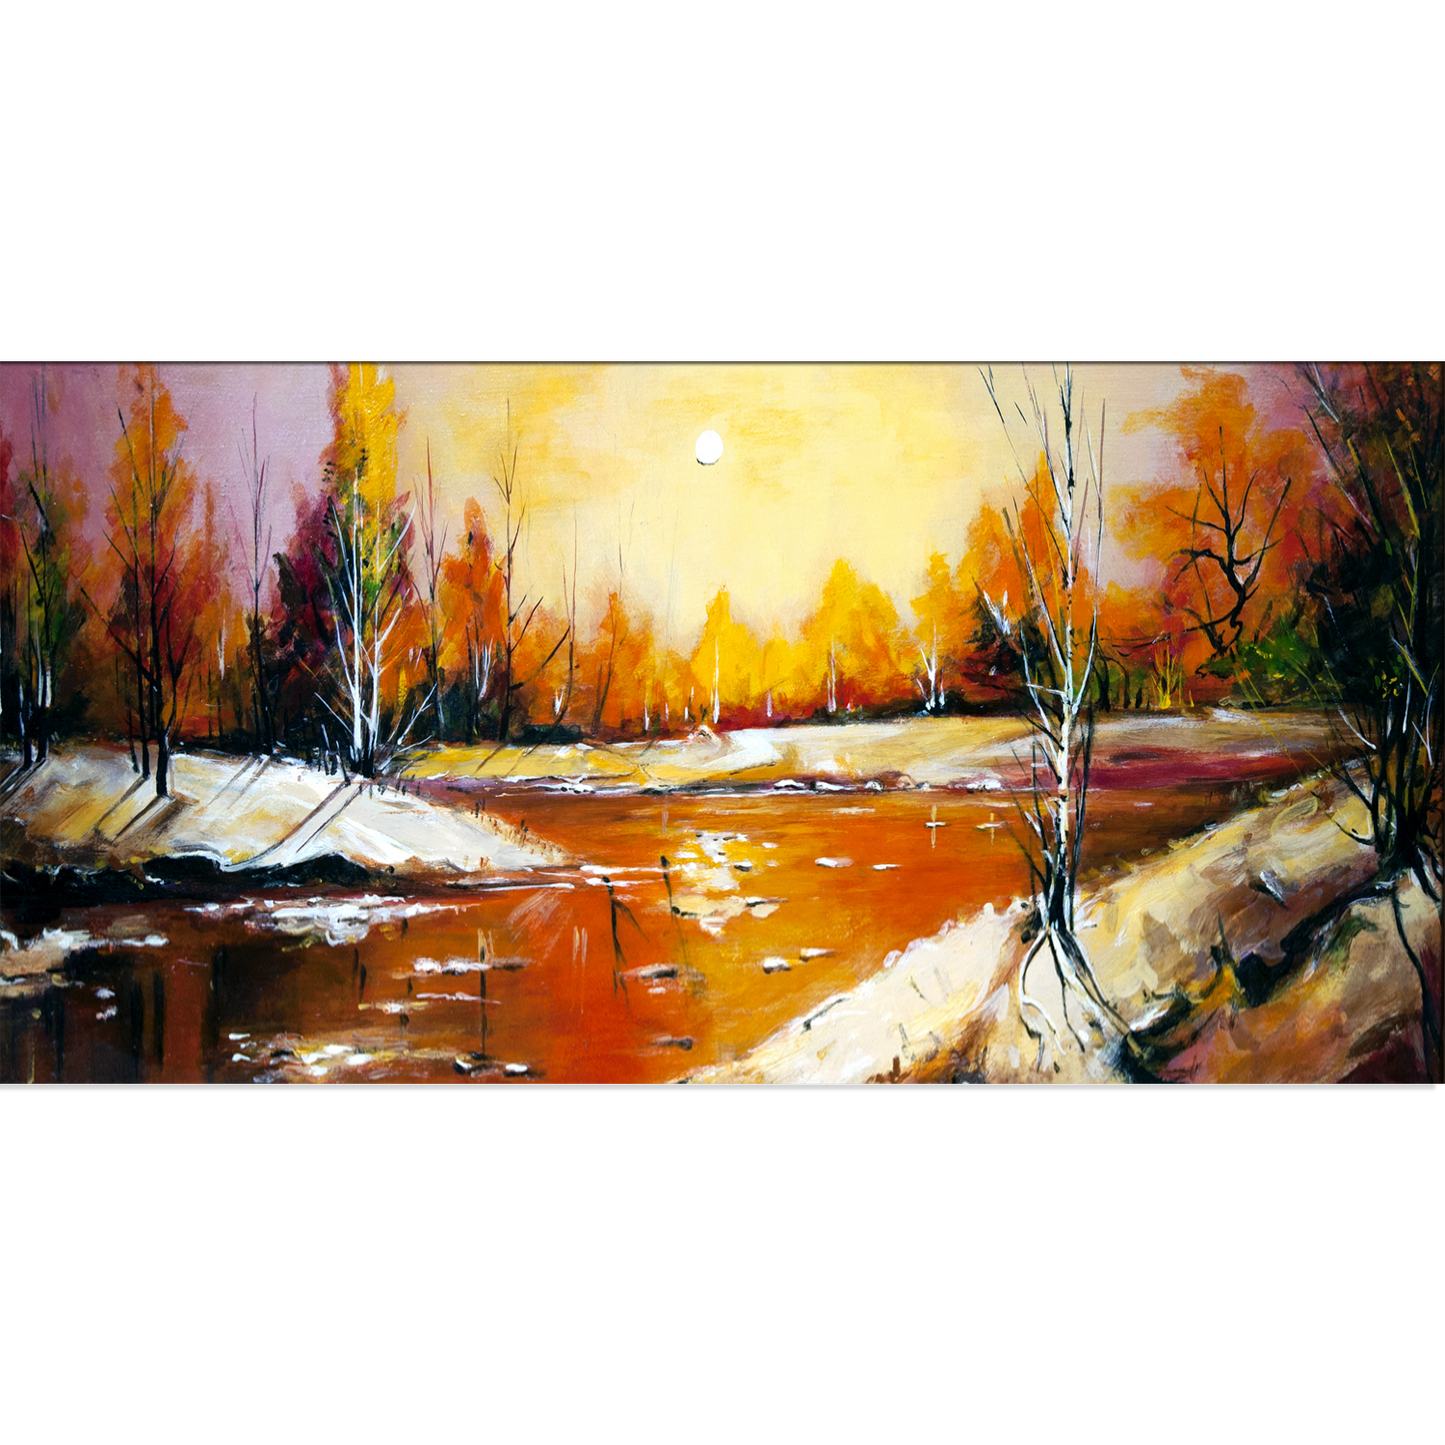 Abstract River Canvas Wall Painting